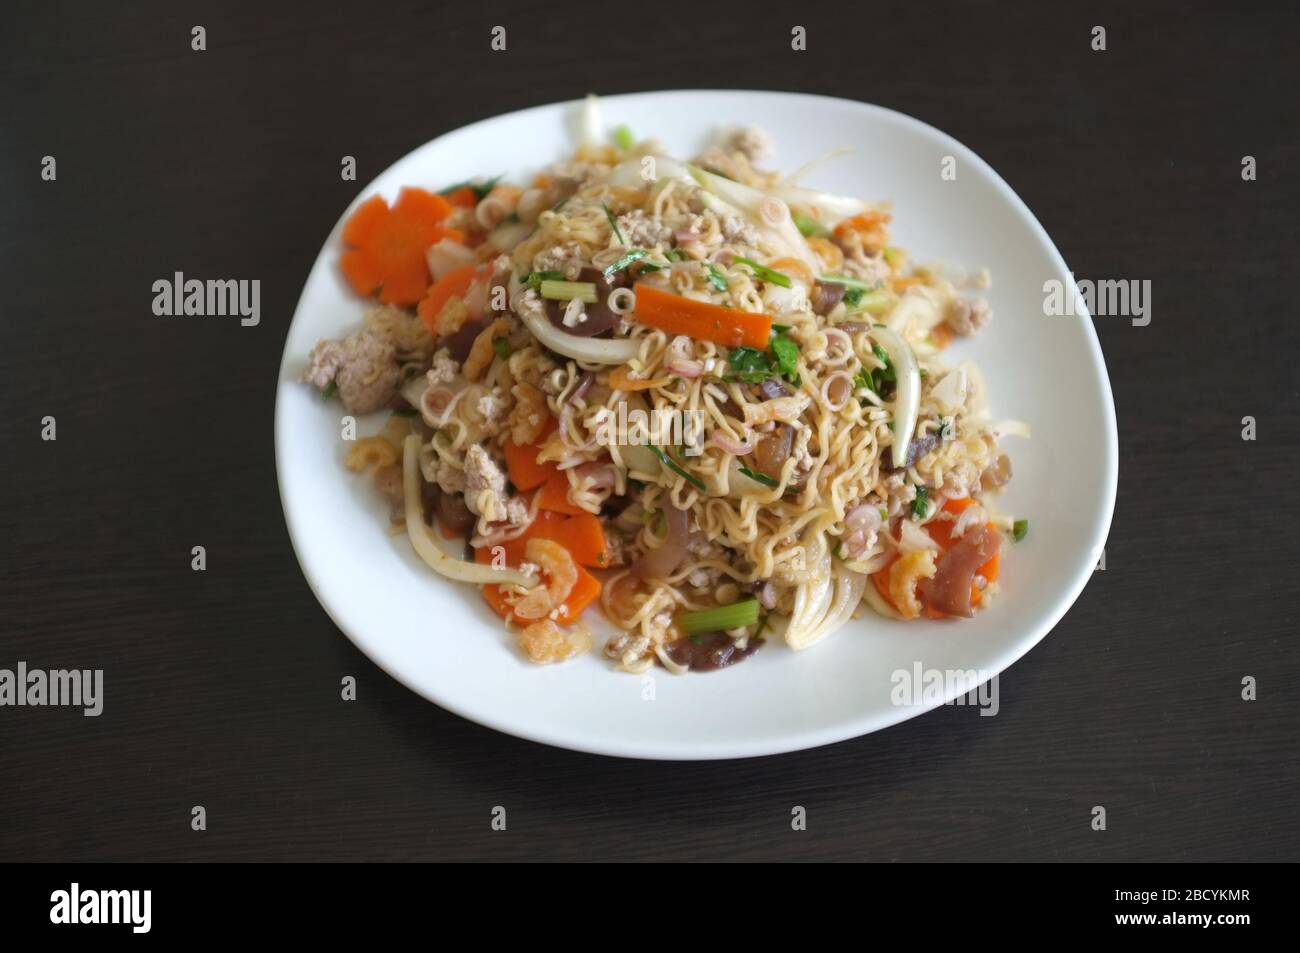 Thai style street food , Instant noodle spicy salad with minced pork and vegetables Stock Photo